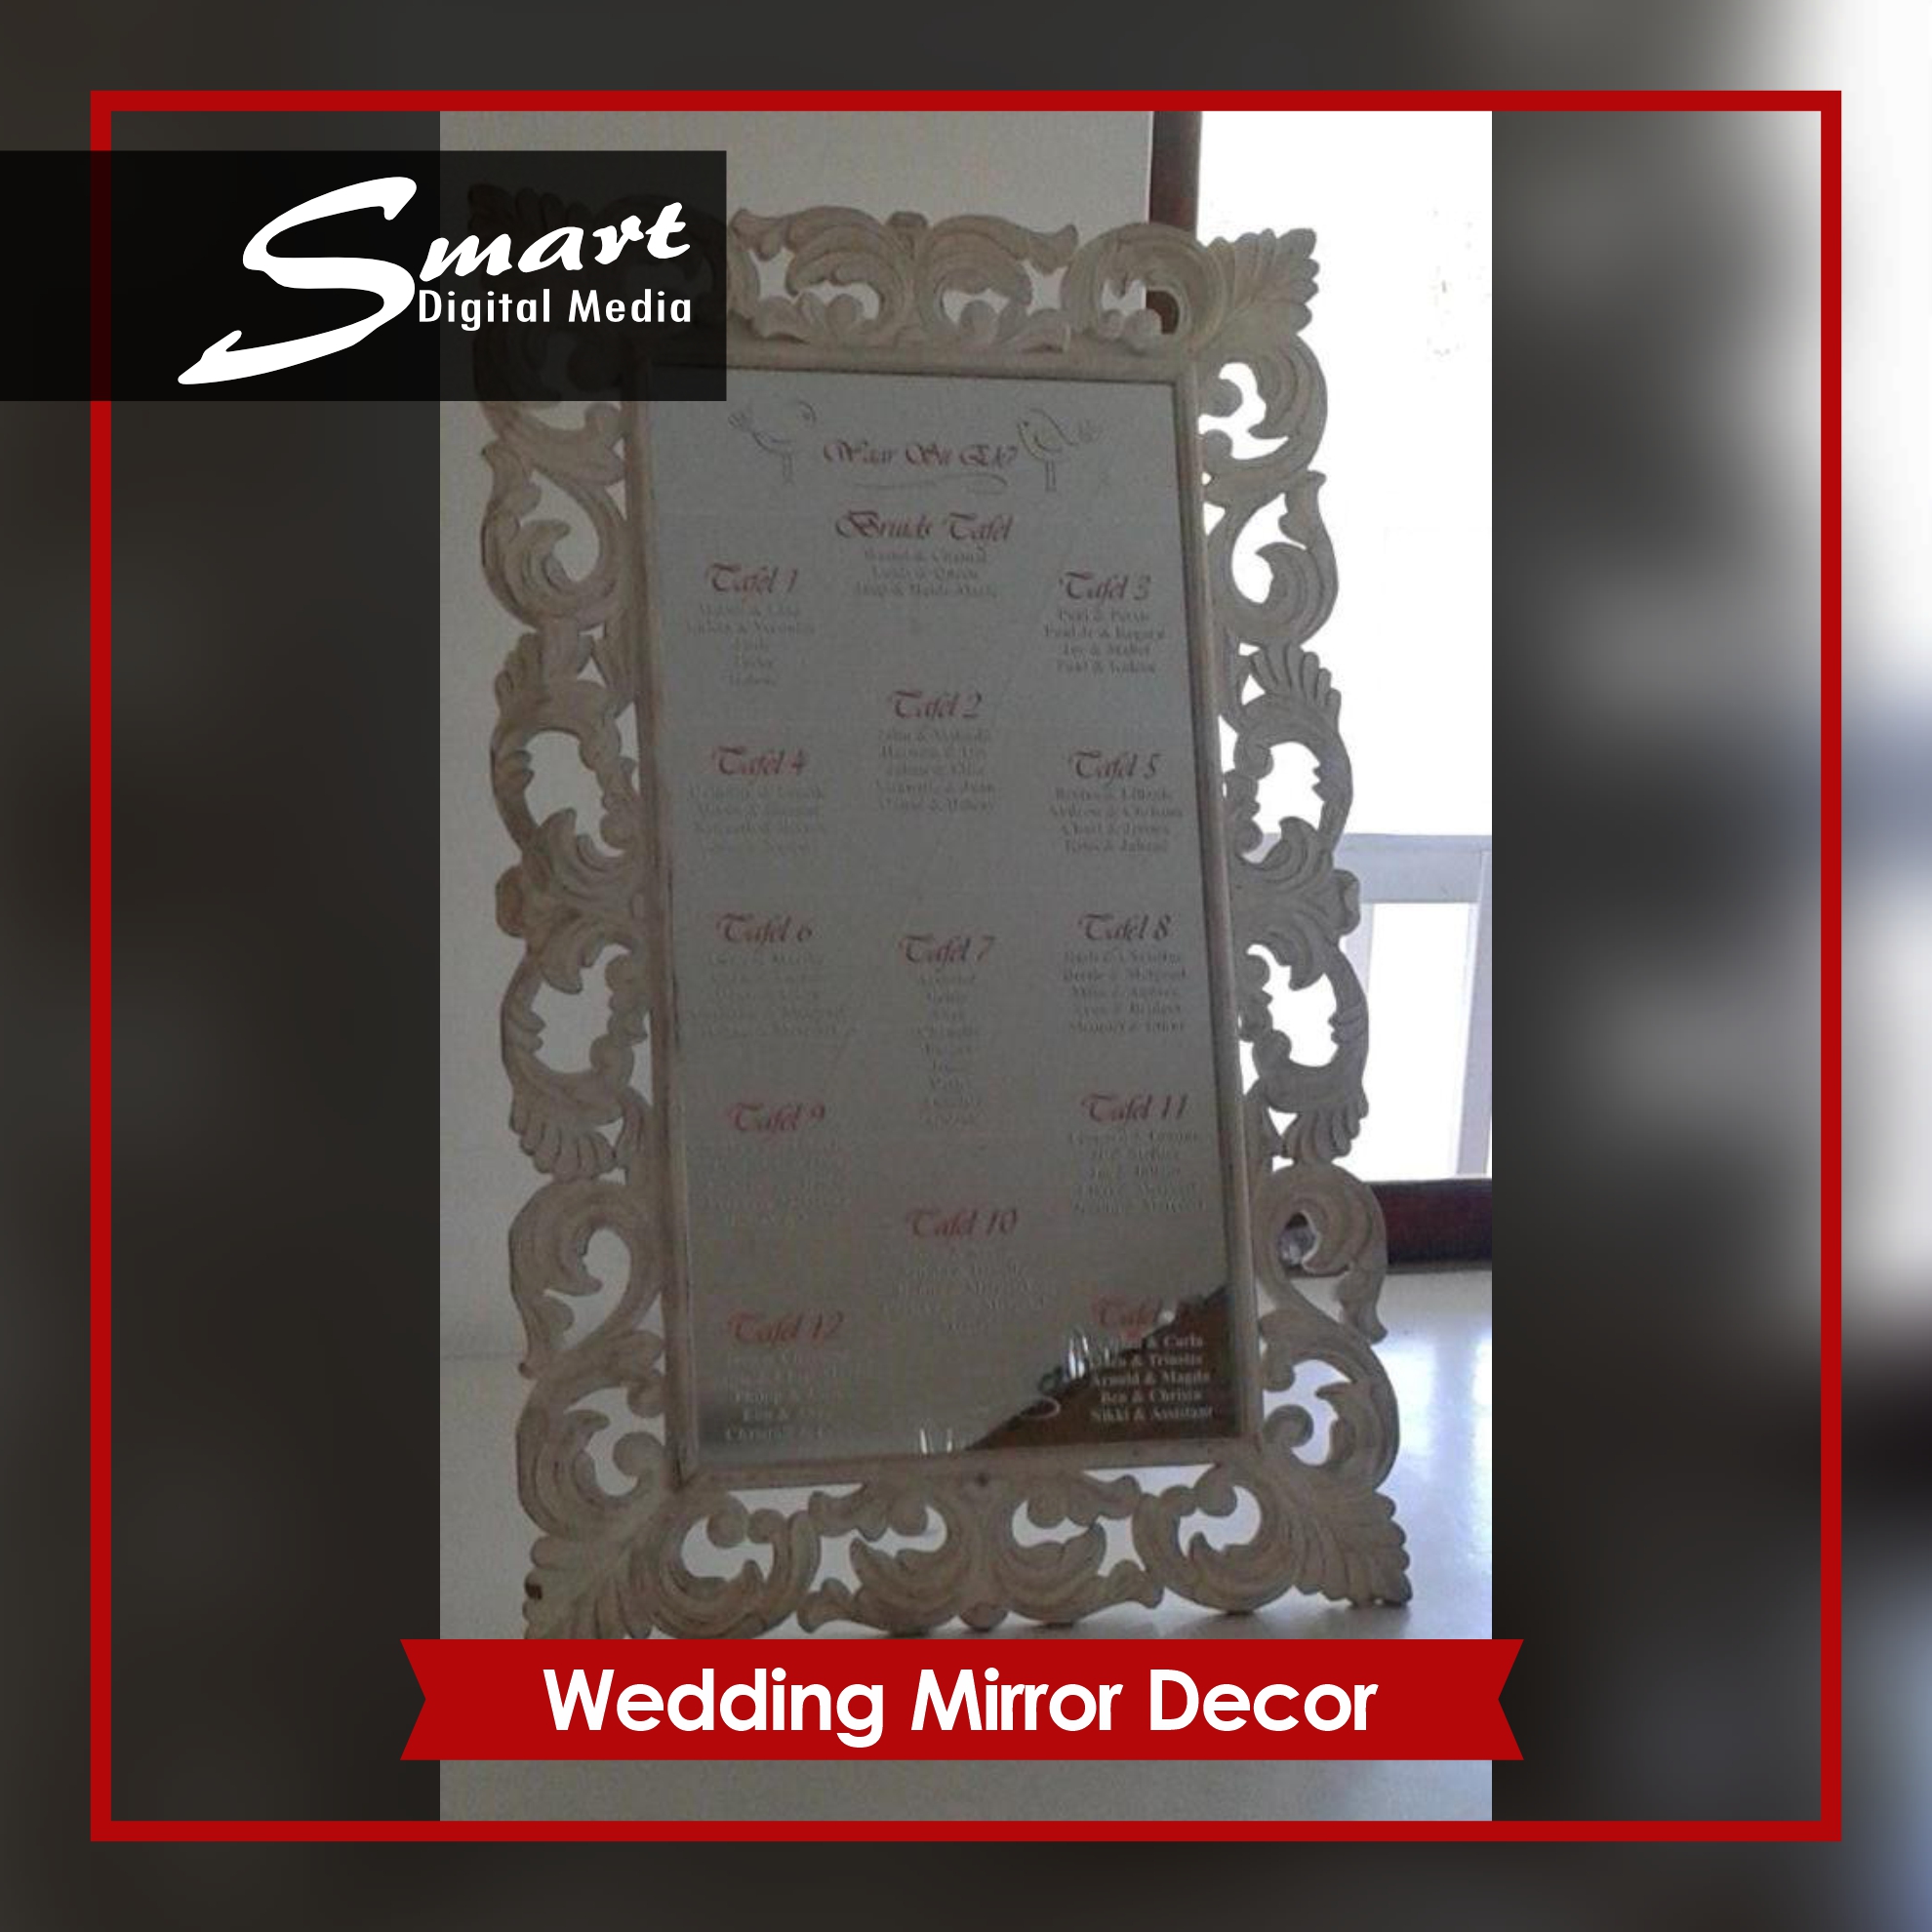 Large Mirrorstanding upright on floor. Mirror has vinyl on for a wedding.